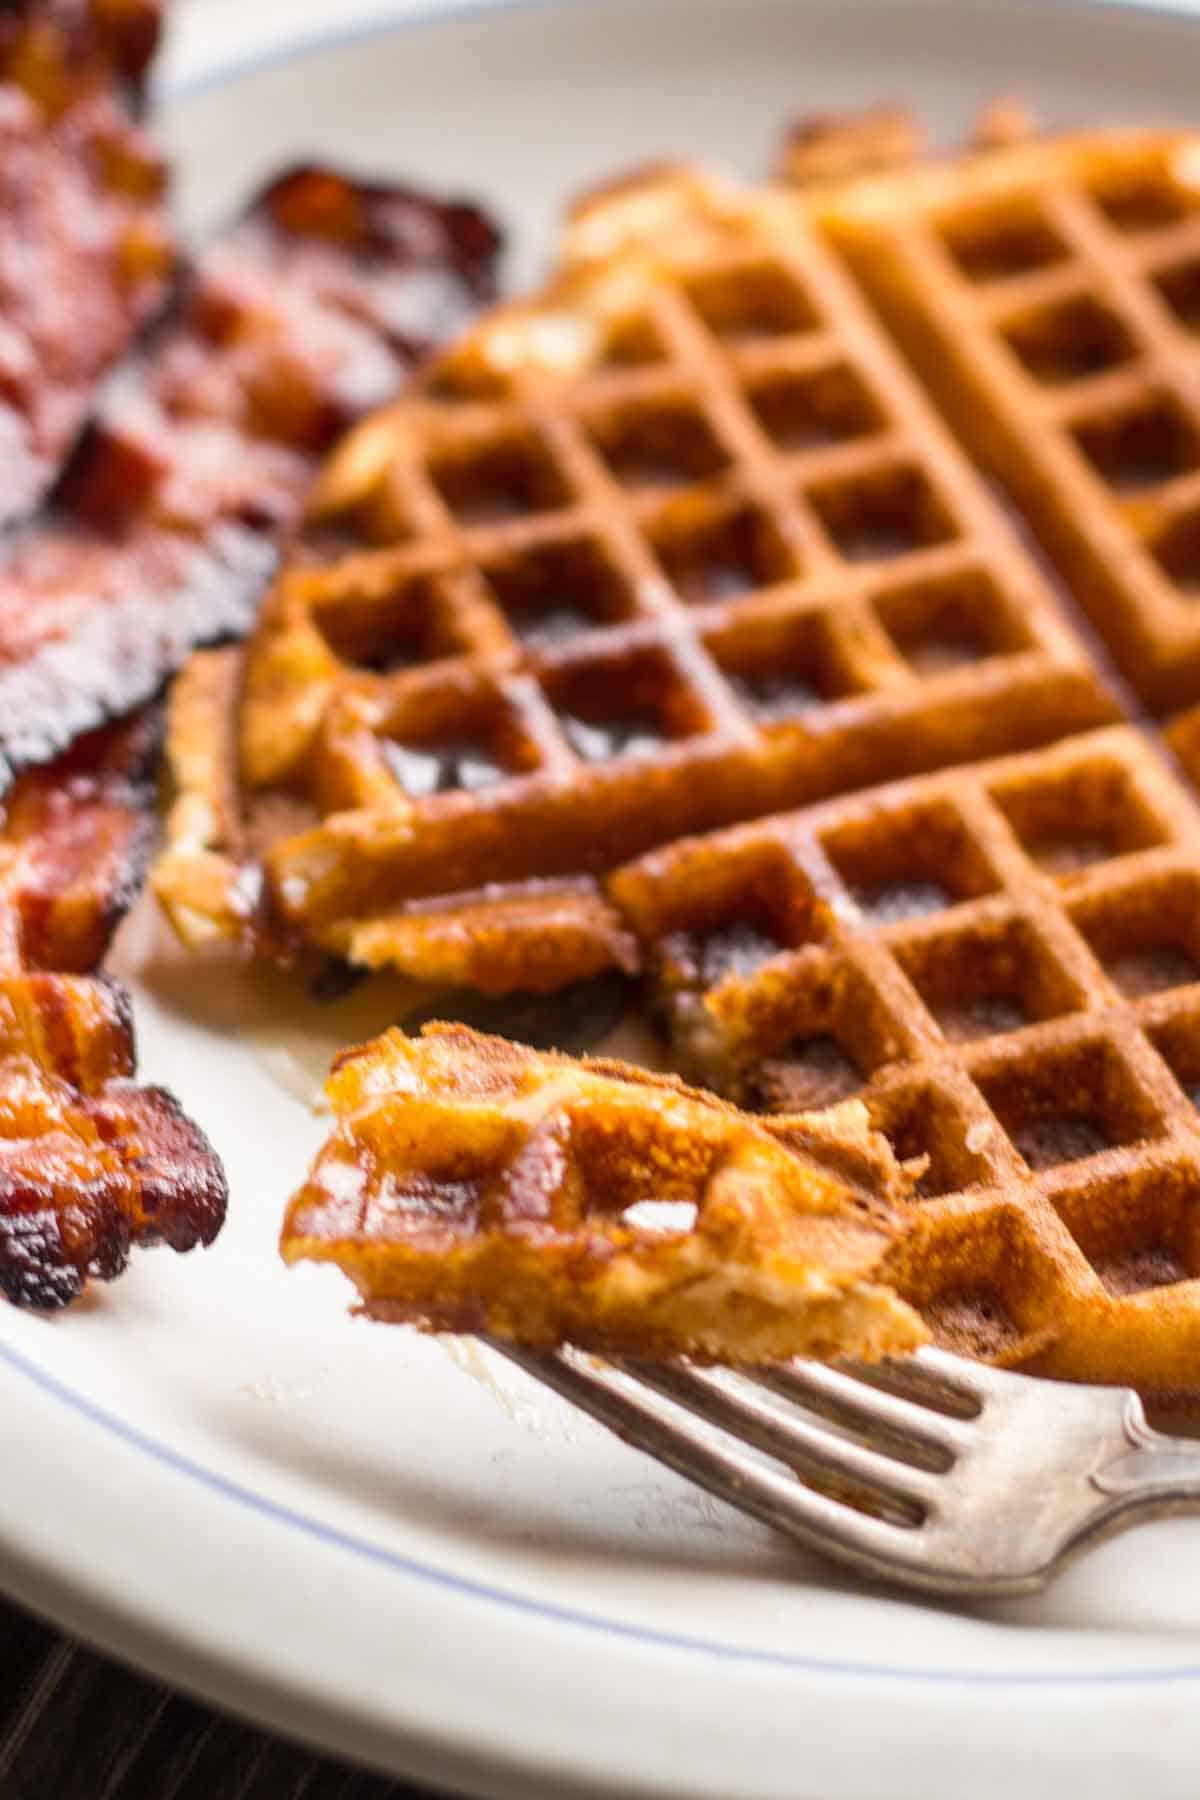 A close up of a fork with a bite of waffle on it.